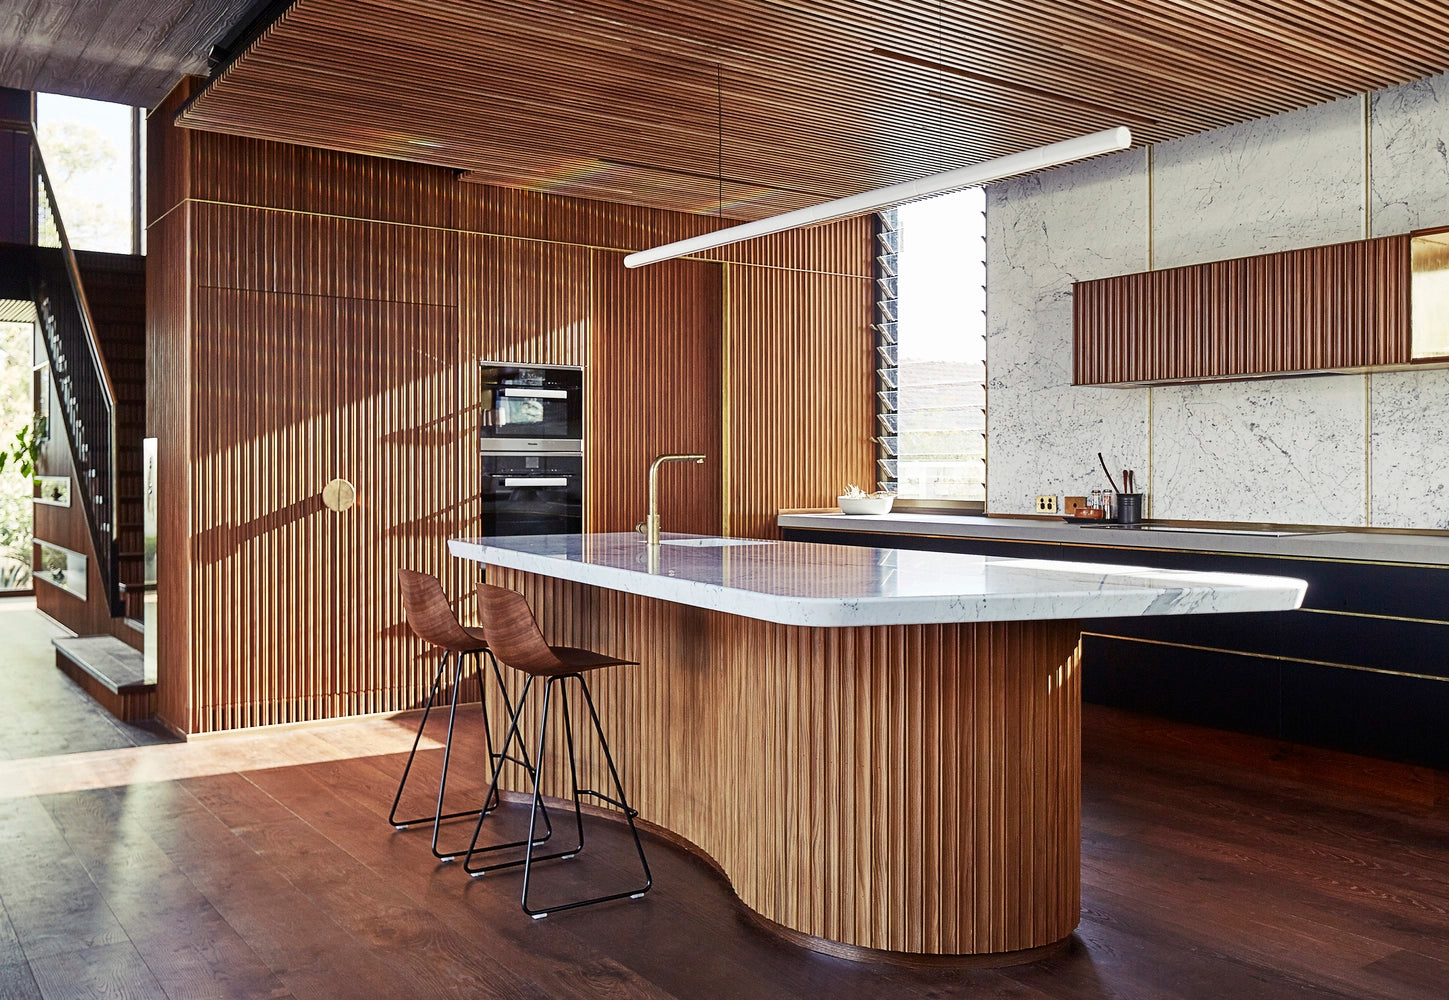 Exploring the Significance of Aesthetics in Kitchen Spaces